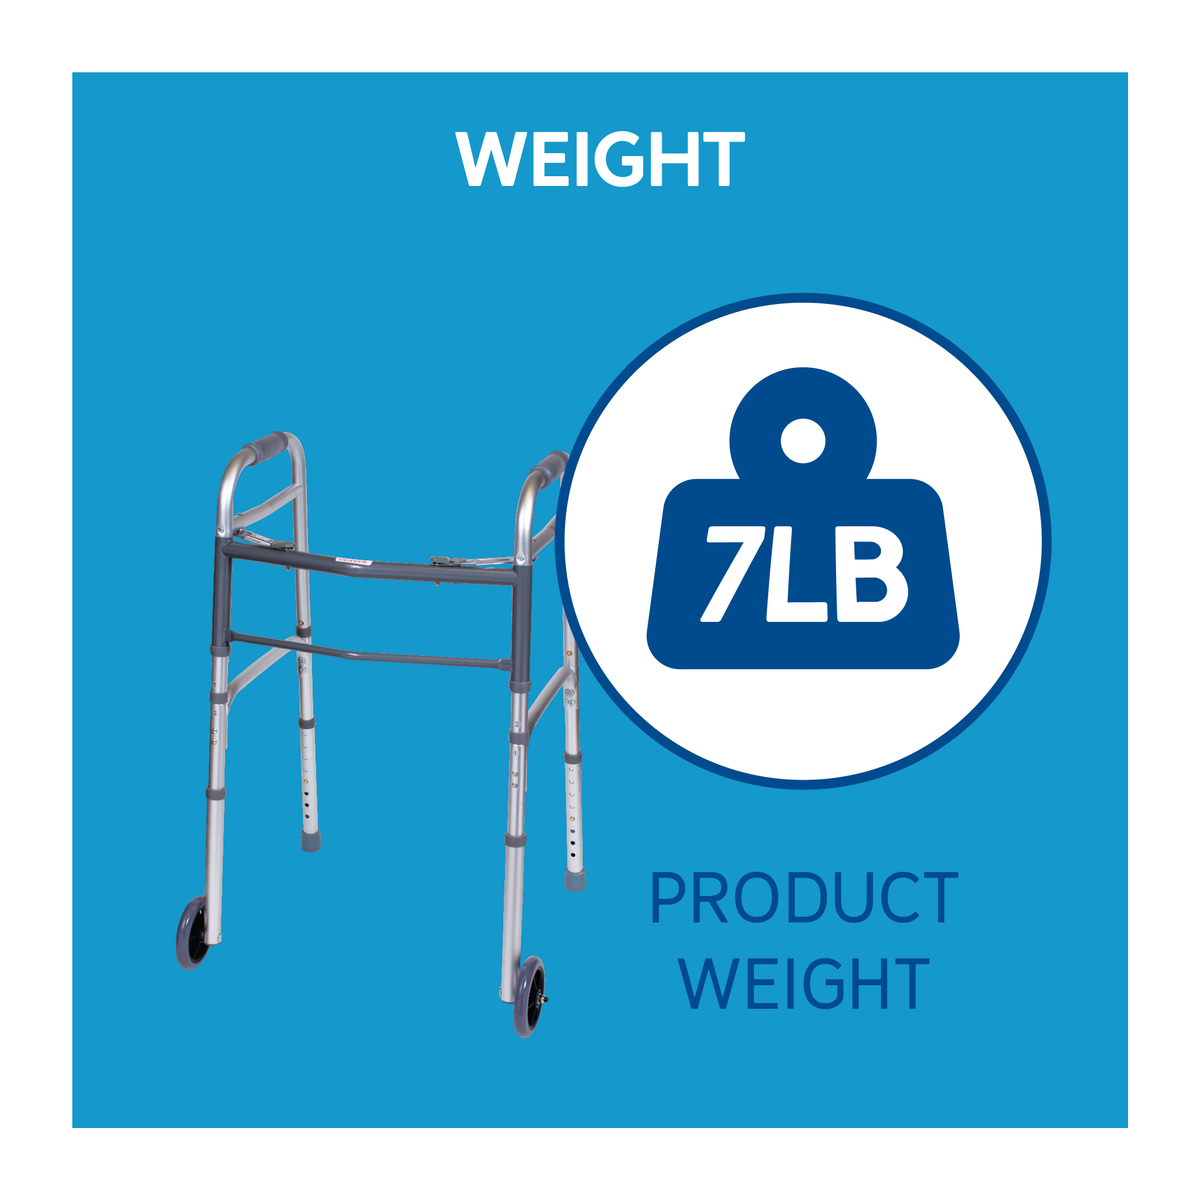 A walker next to a weight icon and text, “Weight 7 lb product weight”